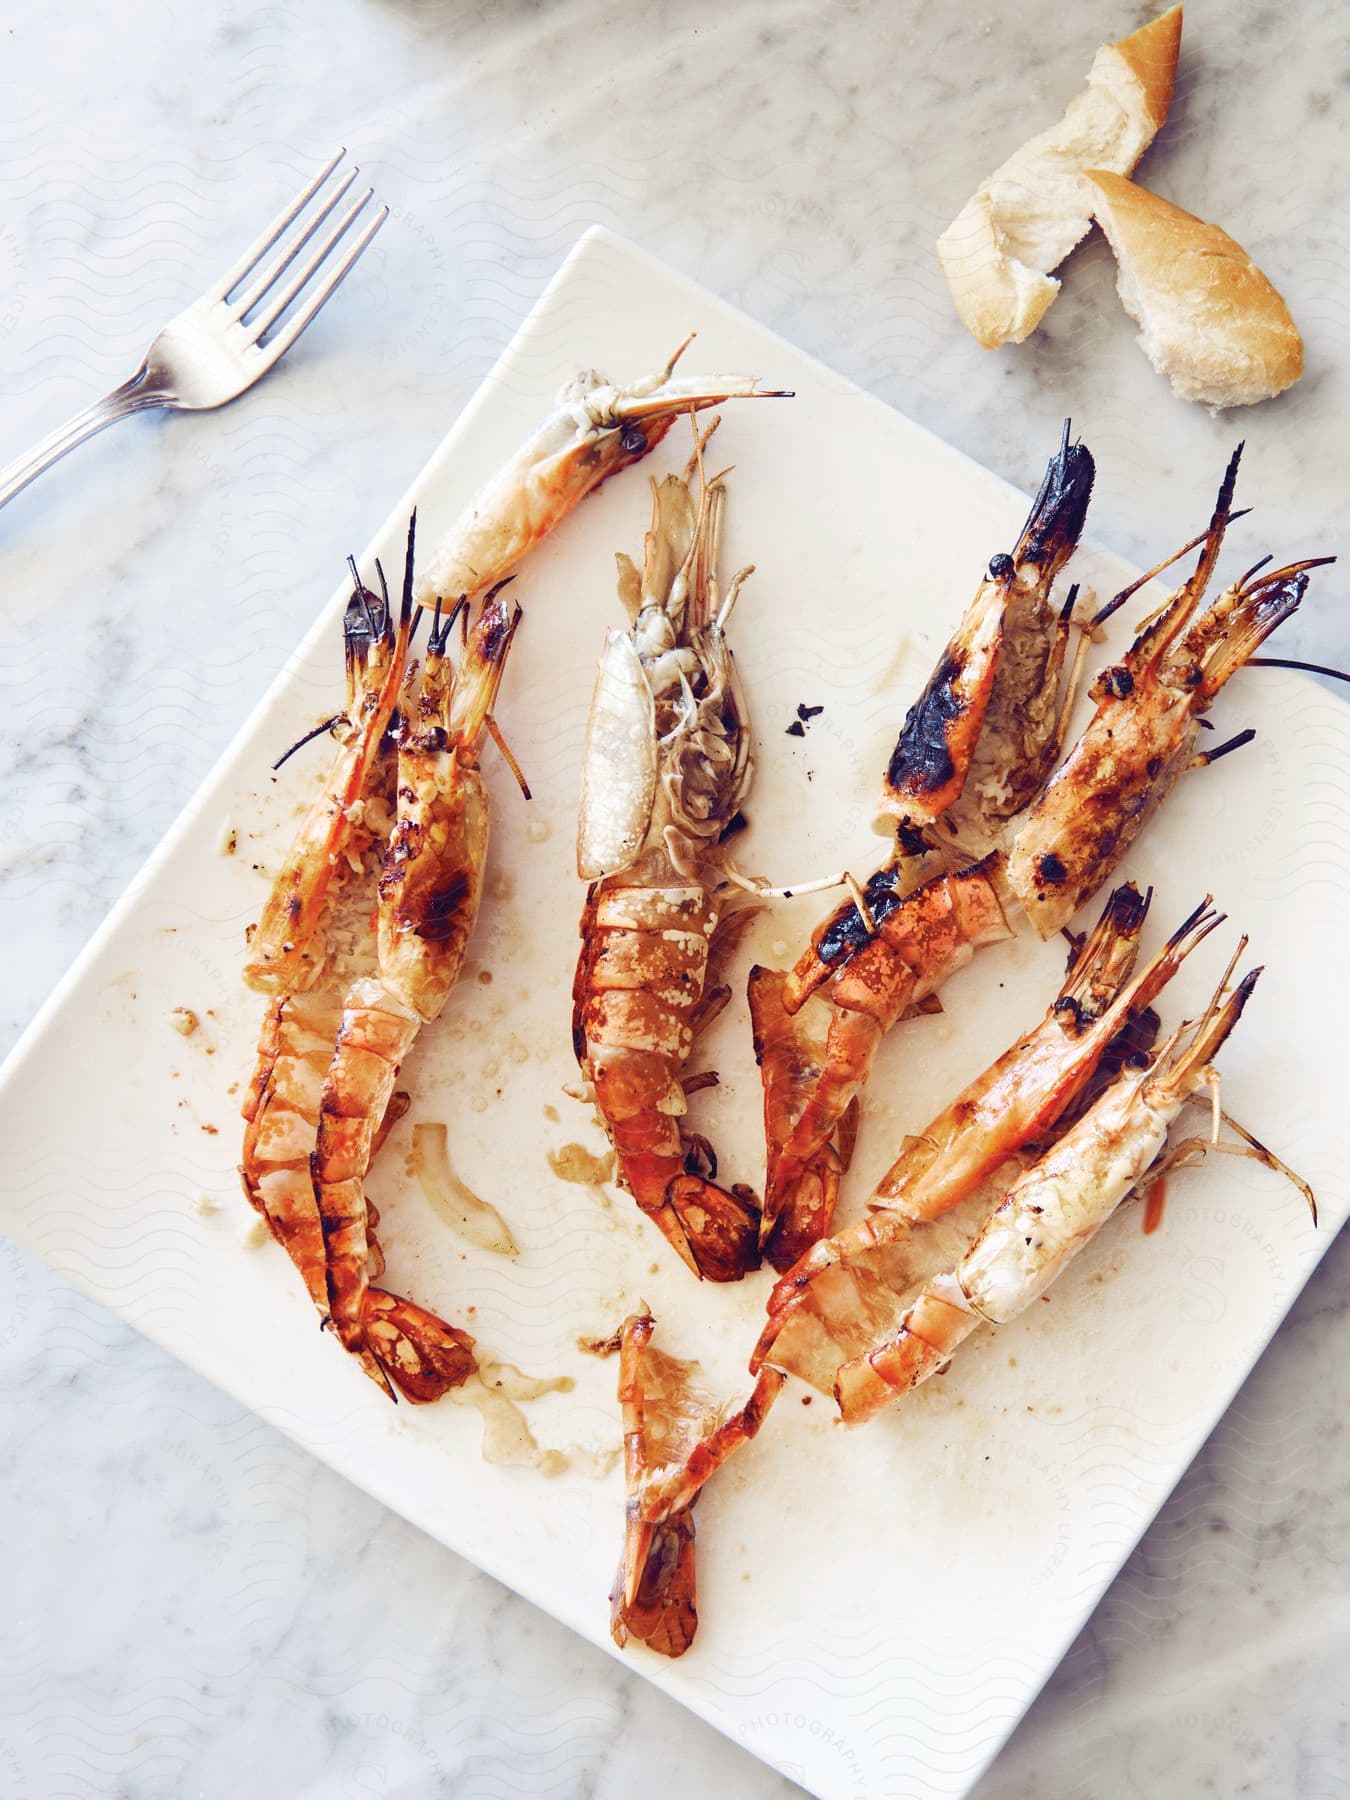 Grilled prawns on a plate with a fork and bread